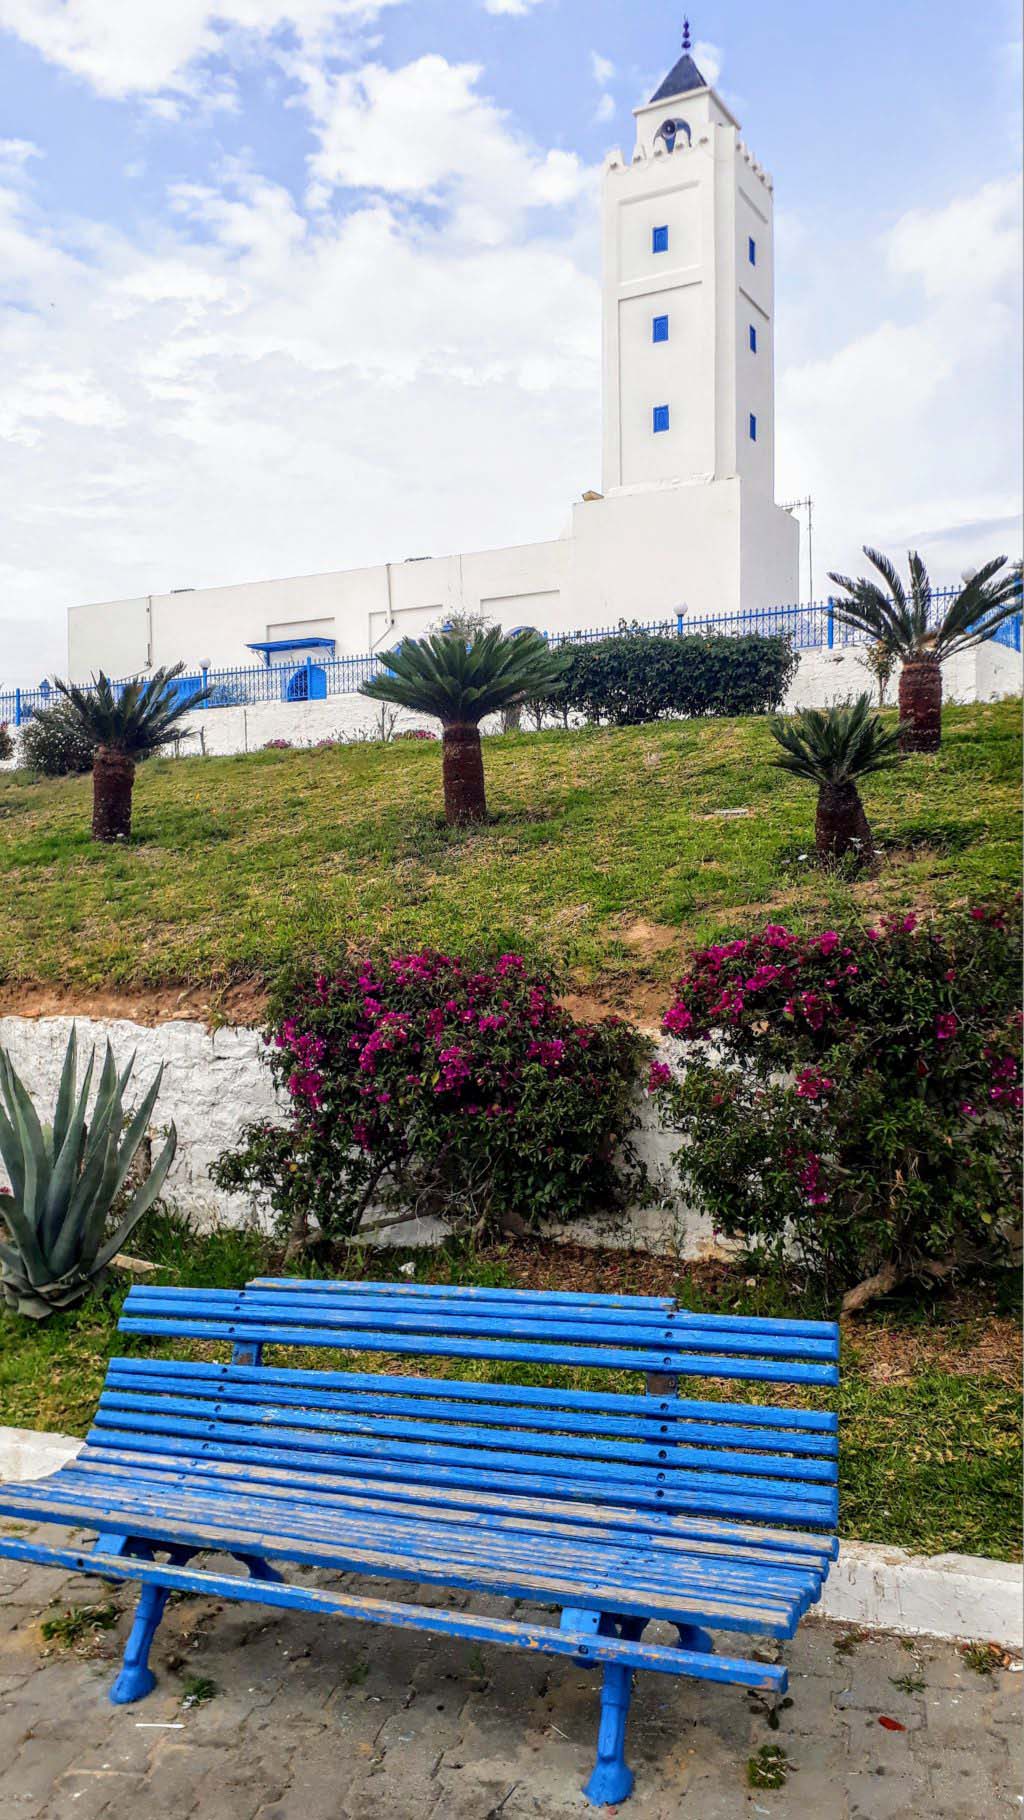 In Sidi Bou Saïd religion has a high priority, the place is considered sacred